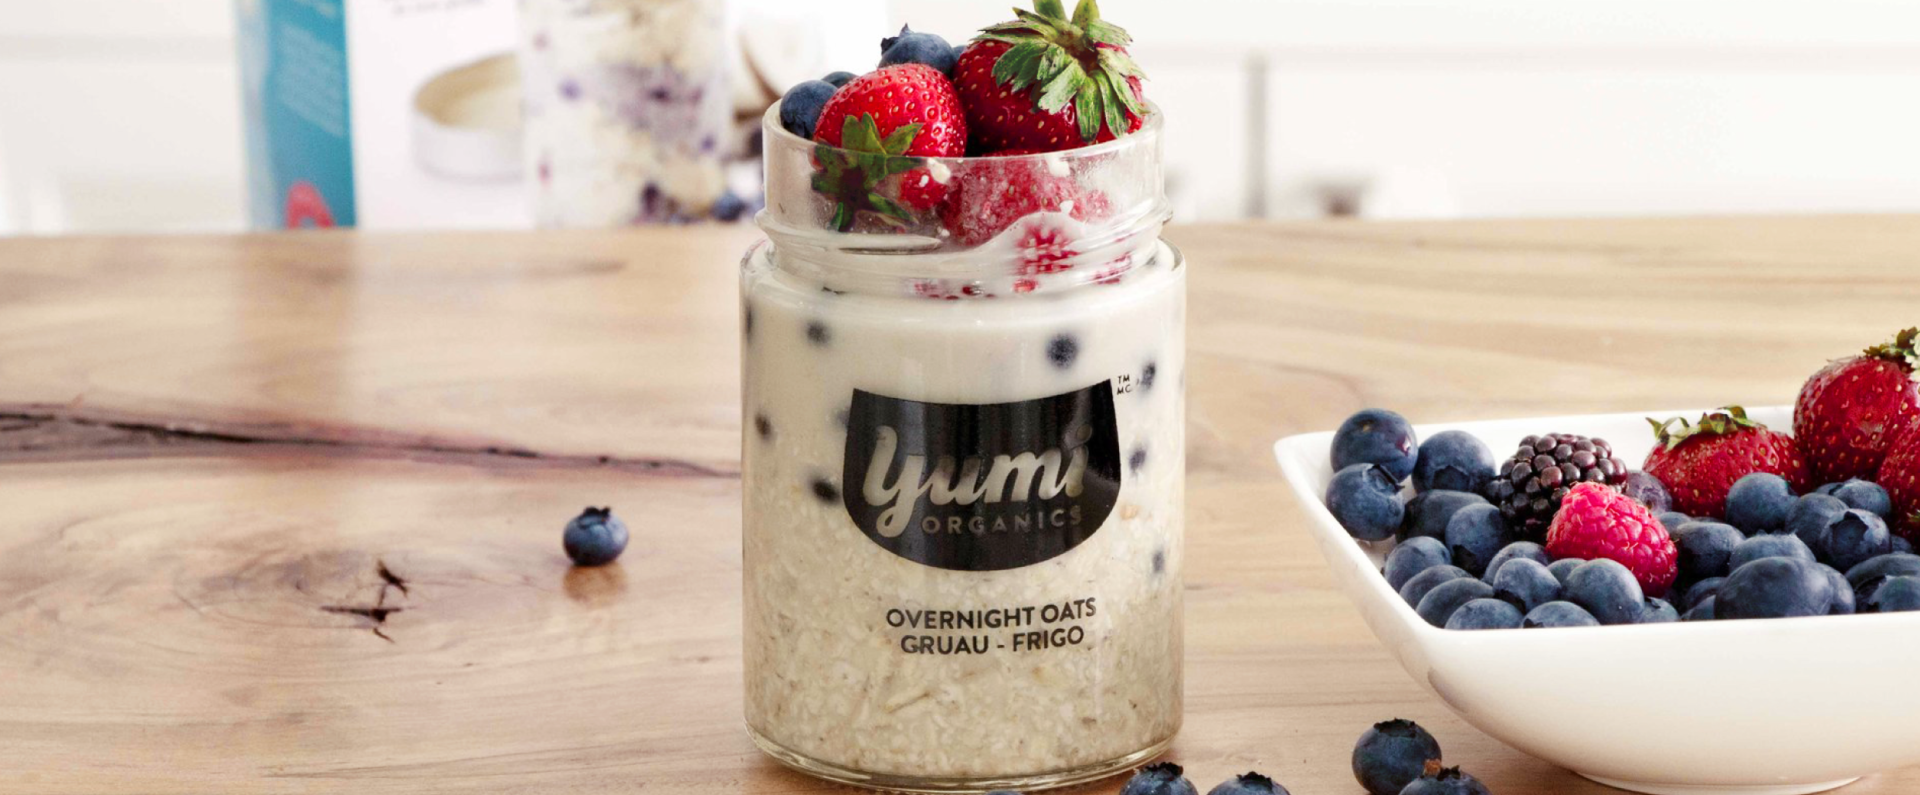 Photo of Yumi Organics overnight oats on a counter with fresh berries